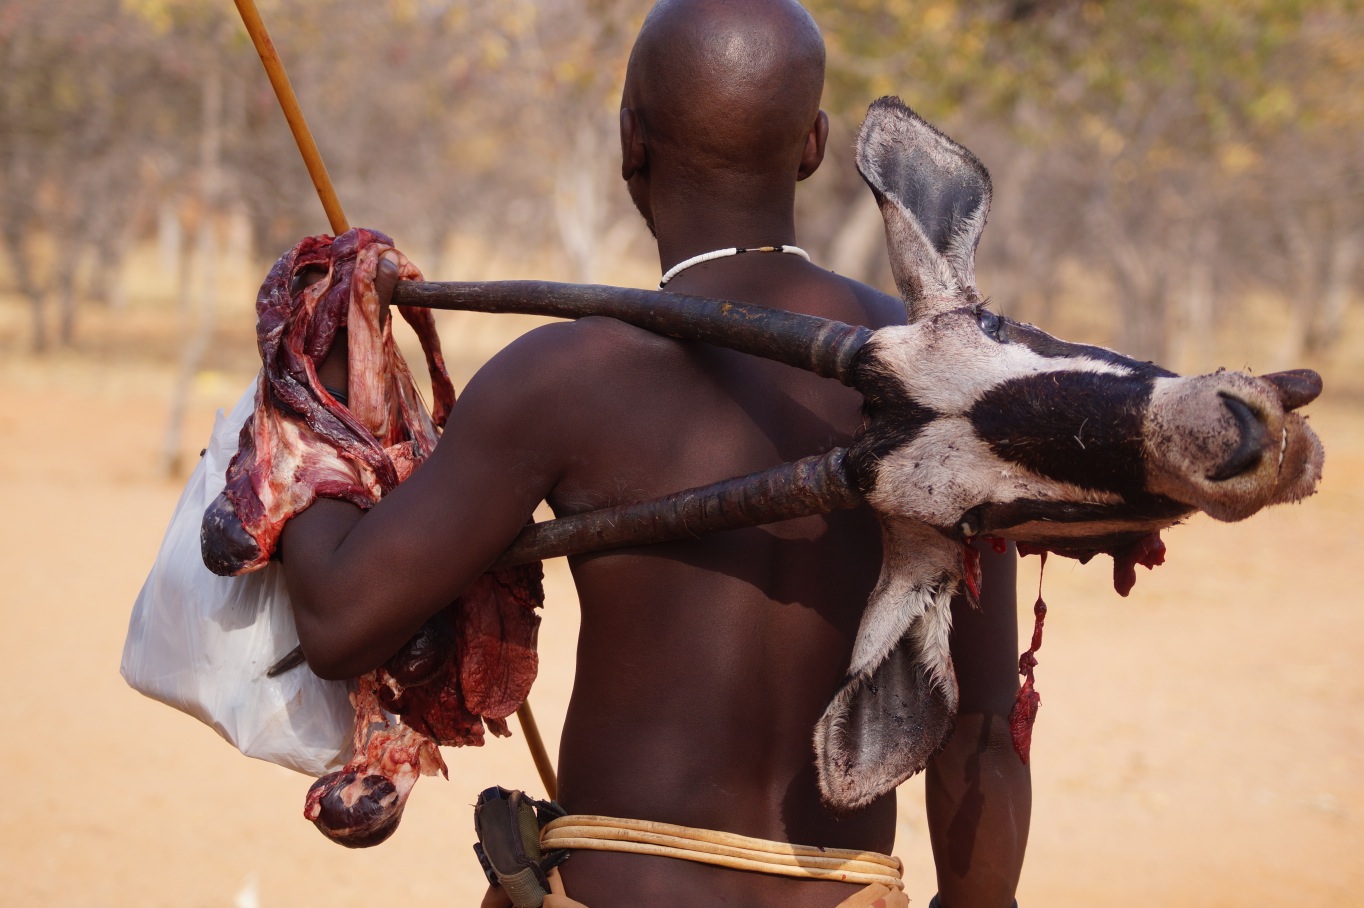 Himba elder returning from a successful hunt.